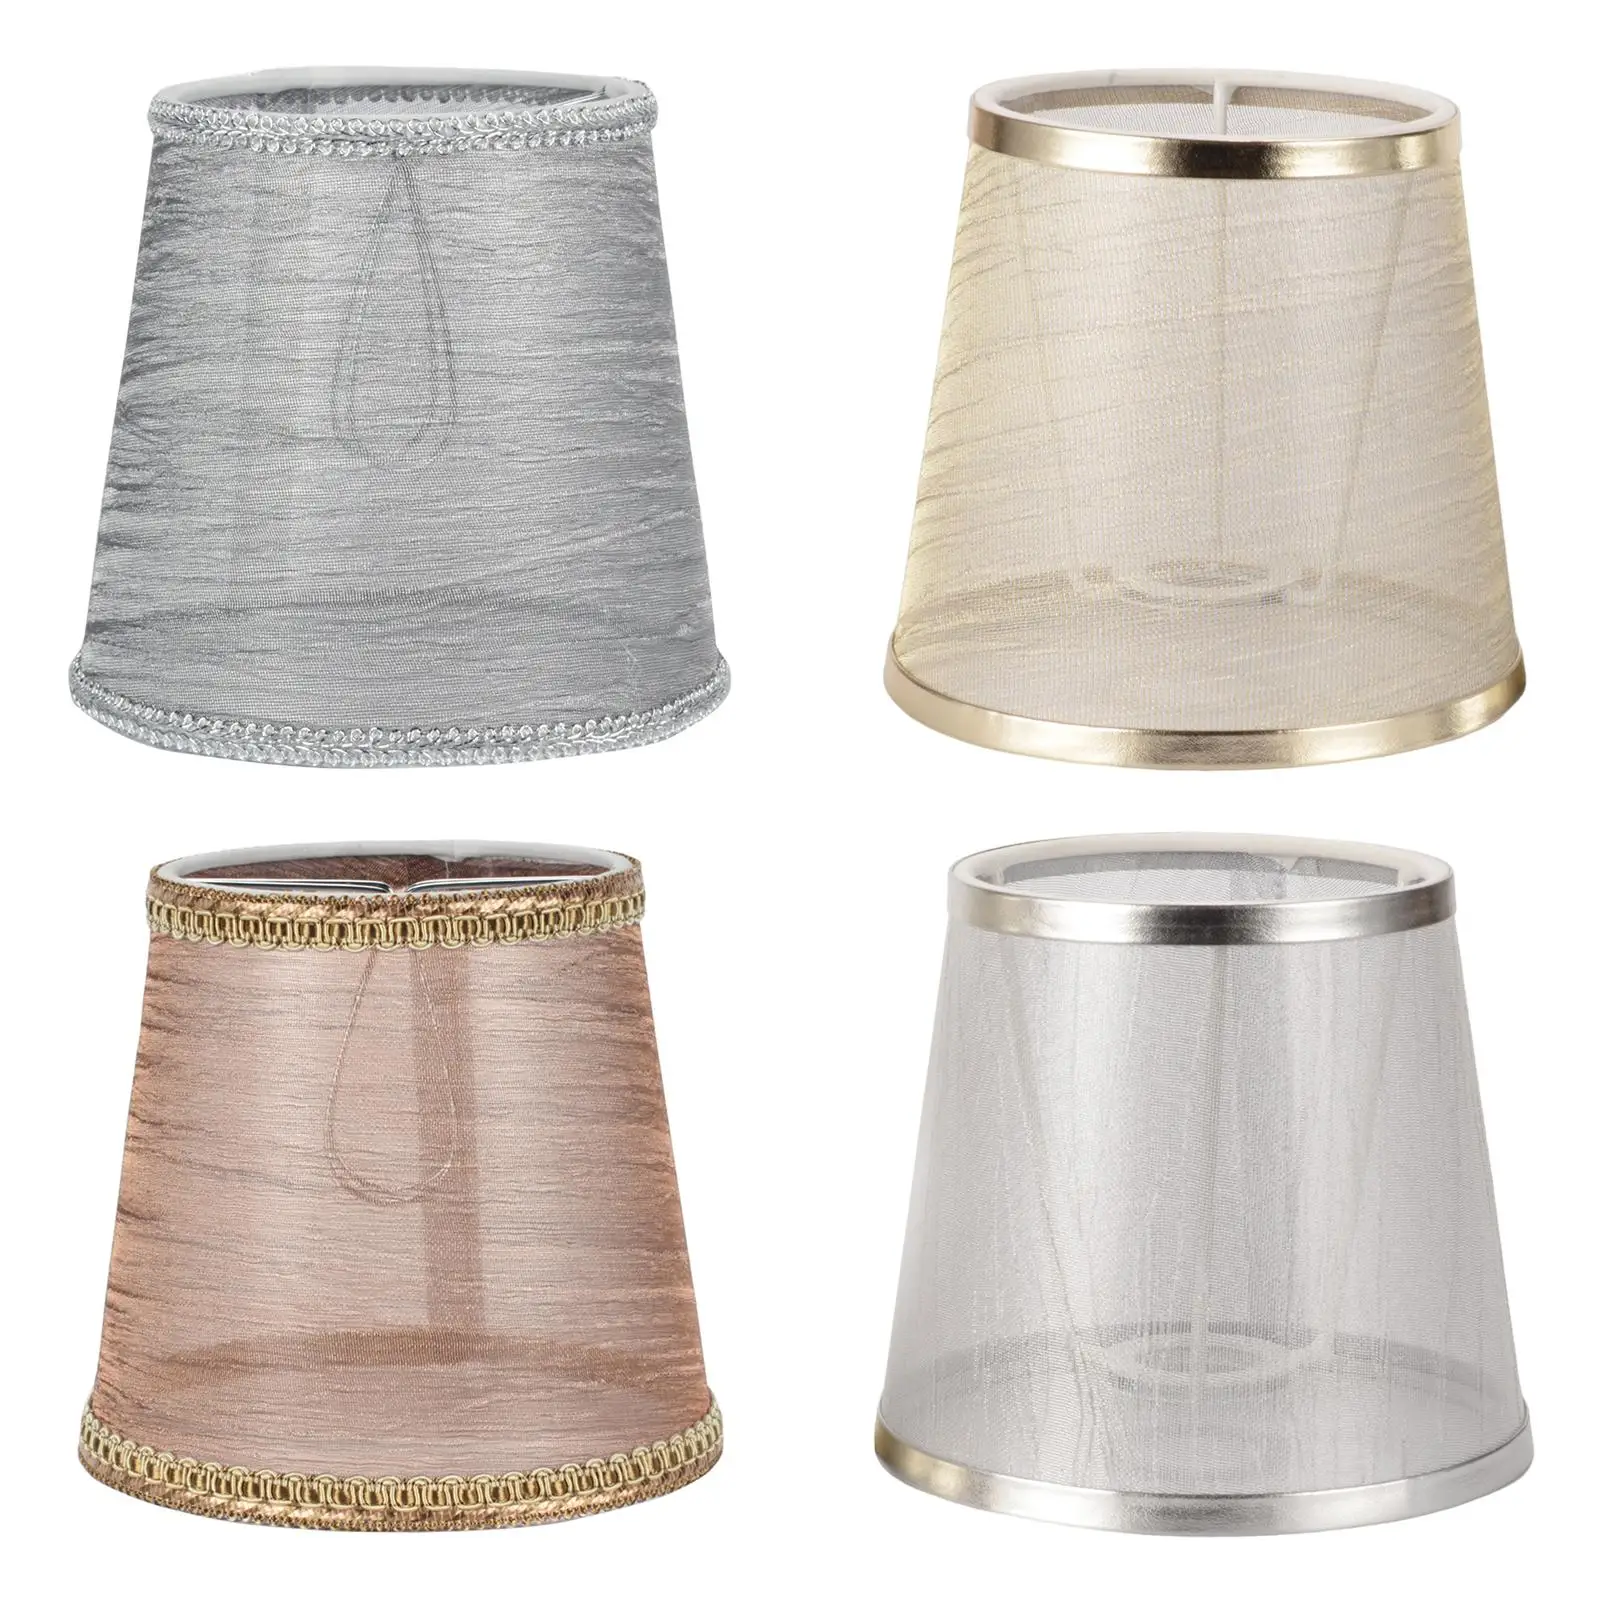 Cloth Lampshade Portable Replacement Shell Cover Lamp Shade for Pendant Light Wedding Wall Lamp Installation Chandelier